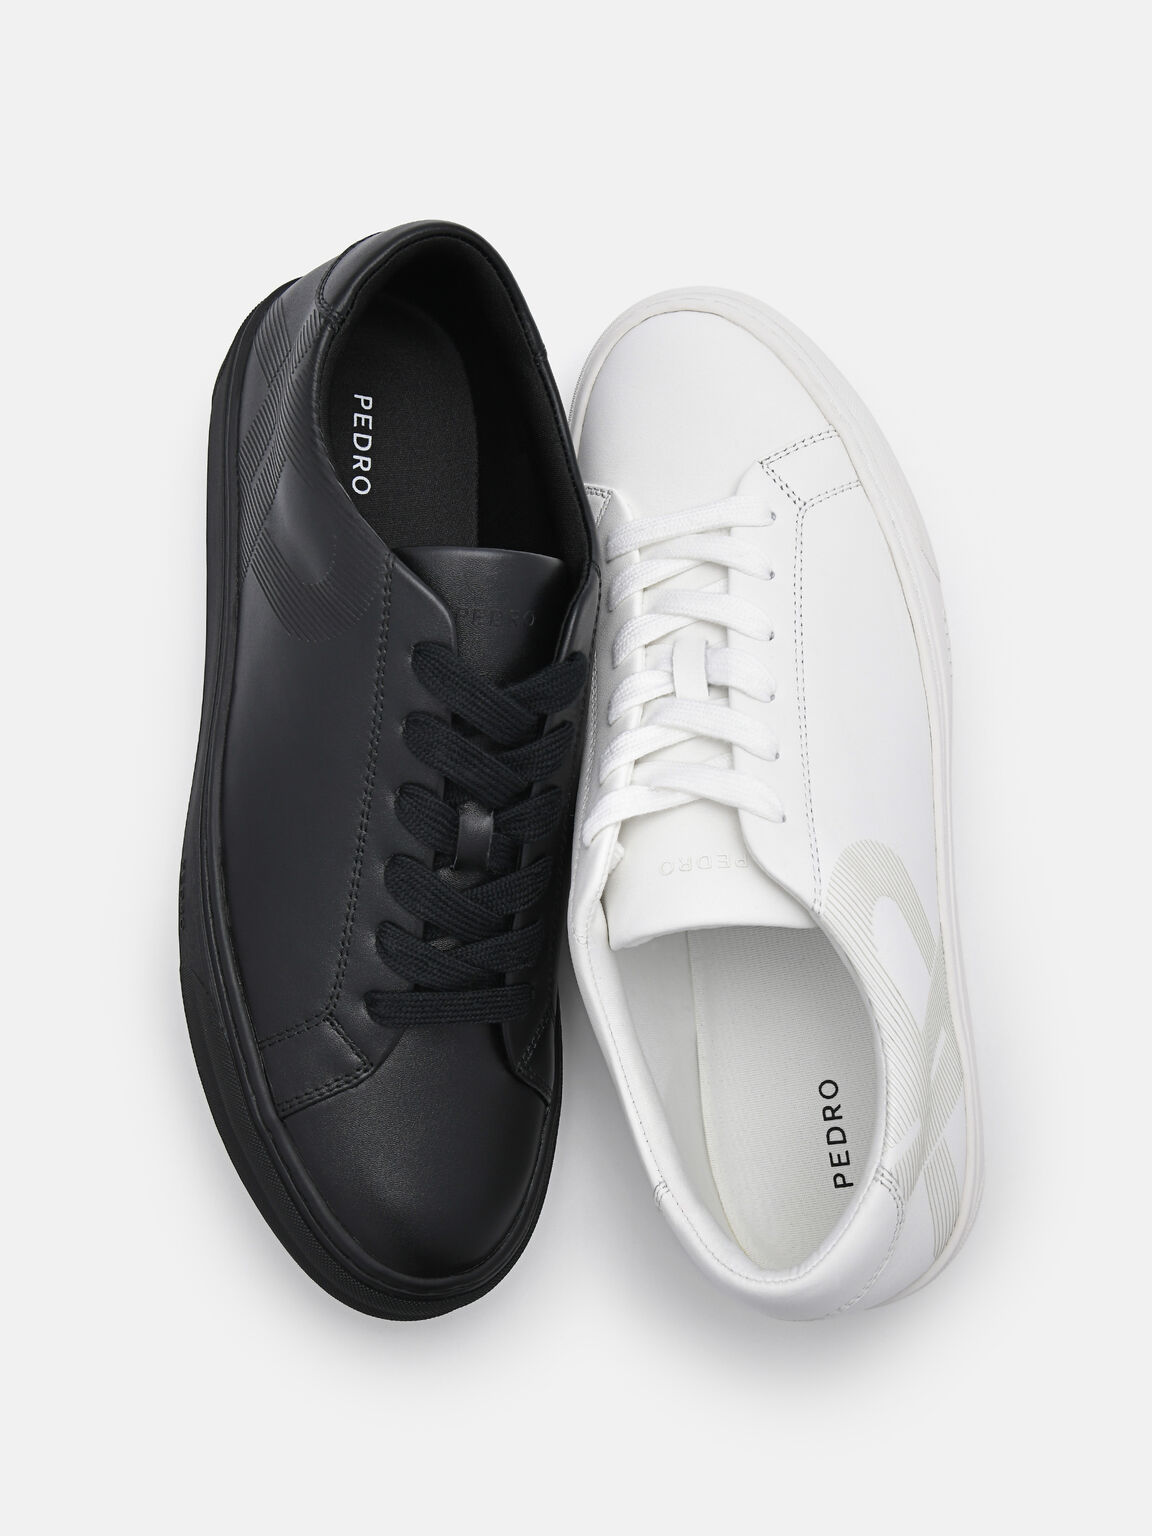 Giày sneakers cổ thấp Icon, Trắng, hi-res